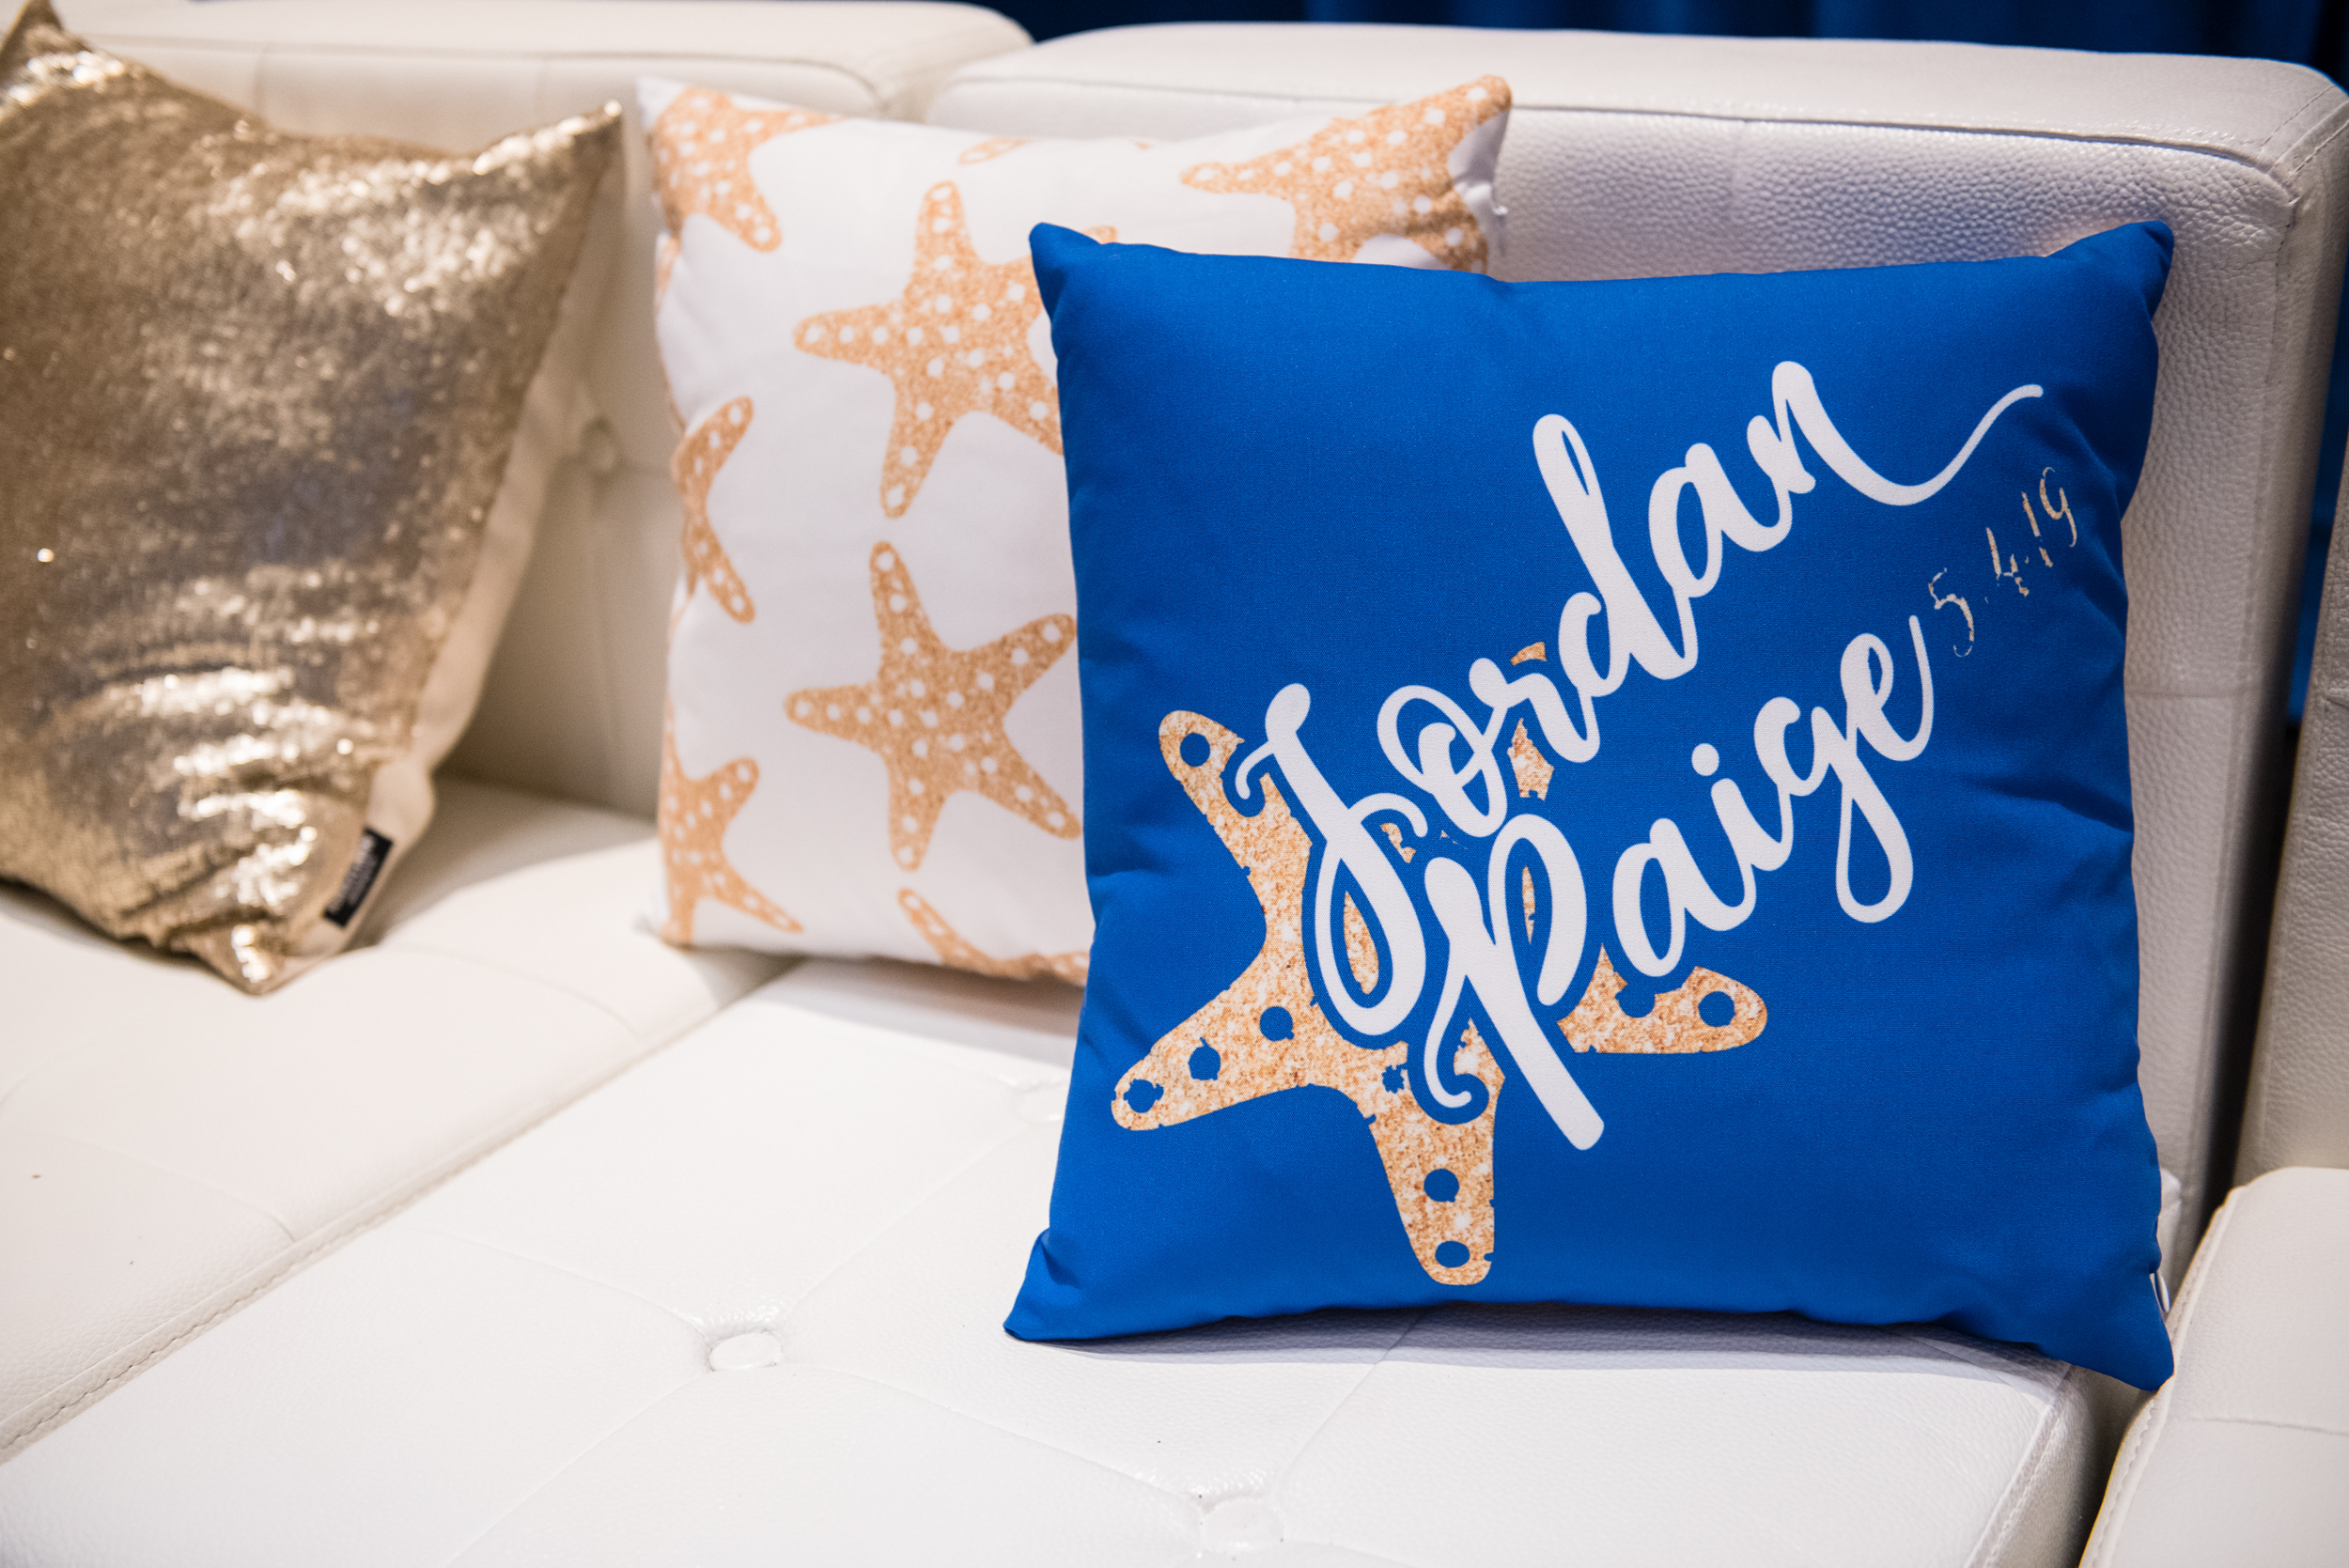 Logoed pillows at Jordan's Sparkling Beach Bat Mitzvah at Hyatt Regency Tysons Corner Center Virginia | Pop Color Events | Adding a Pop of Color to Bar & Bat Mitzvahs in DC, MD & VA | Photo by: Lacey Ann Photography